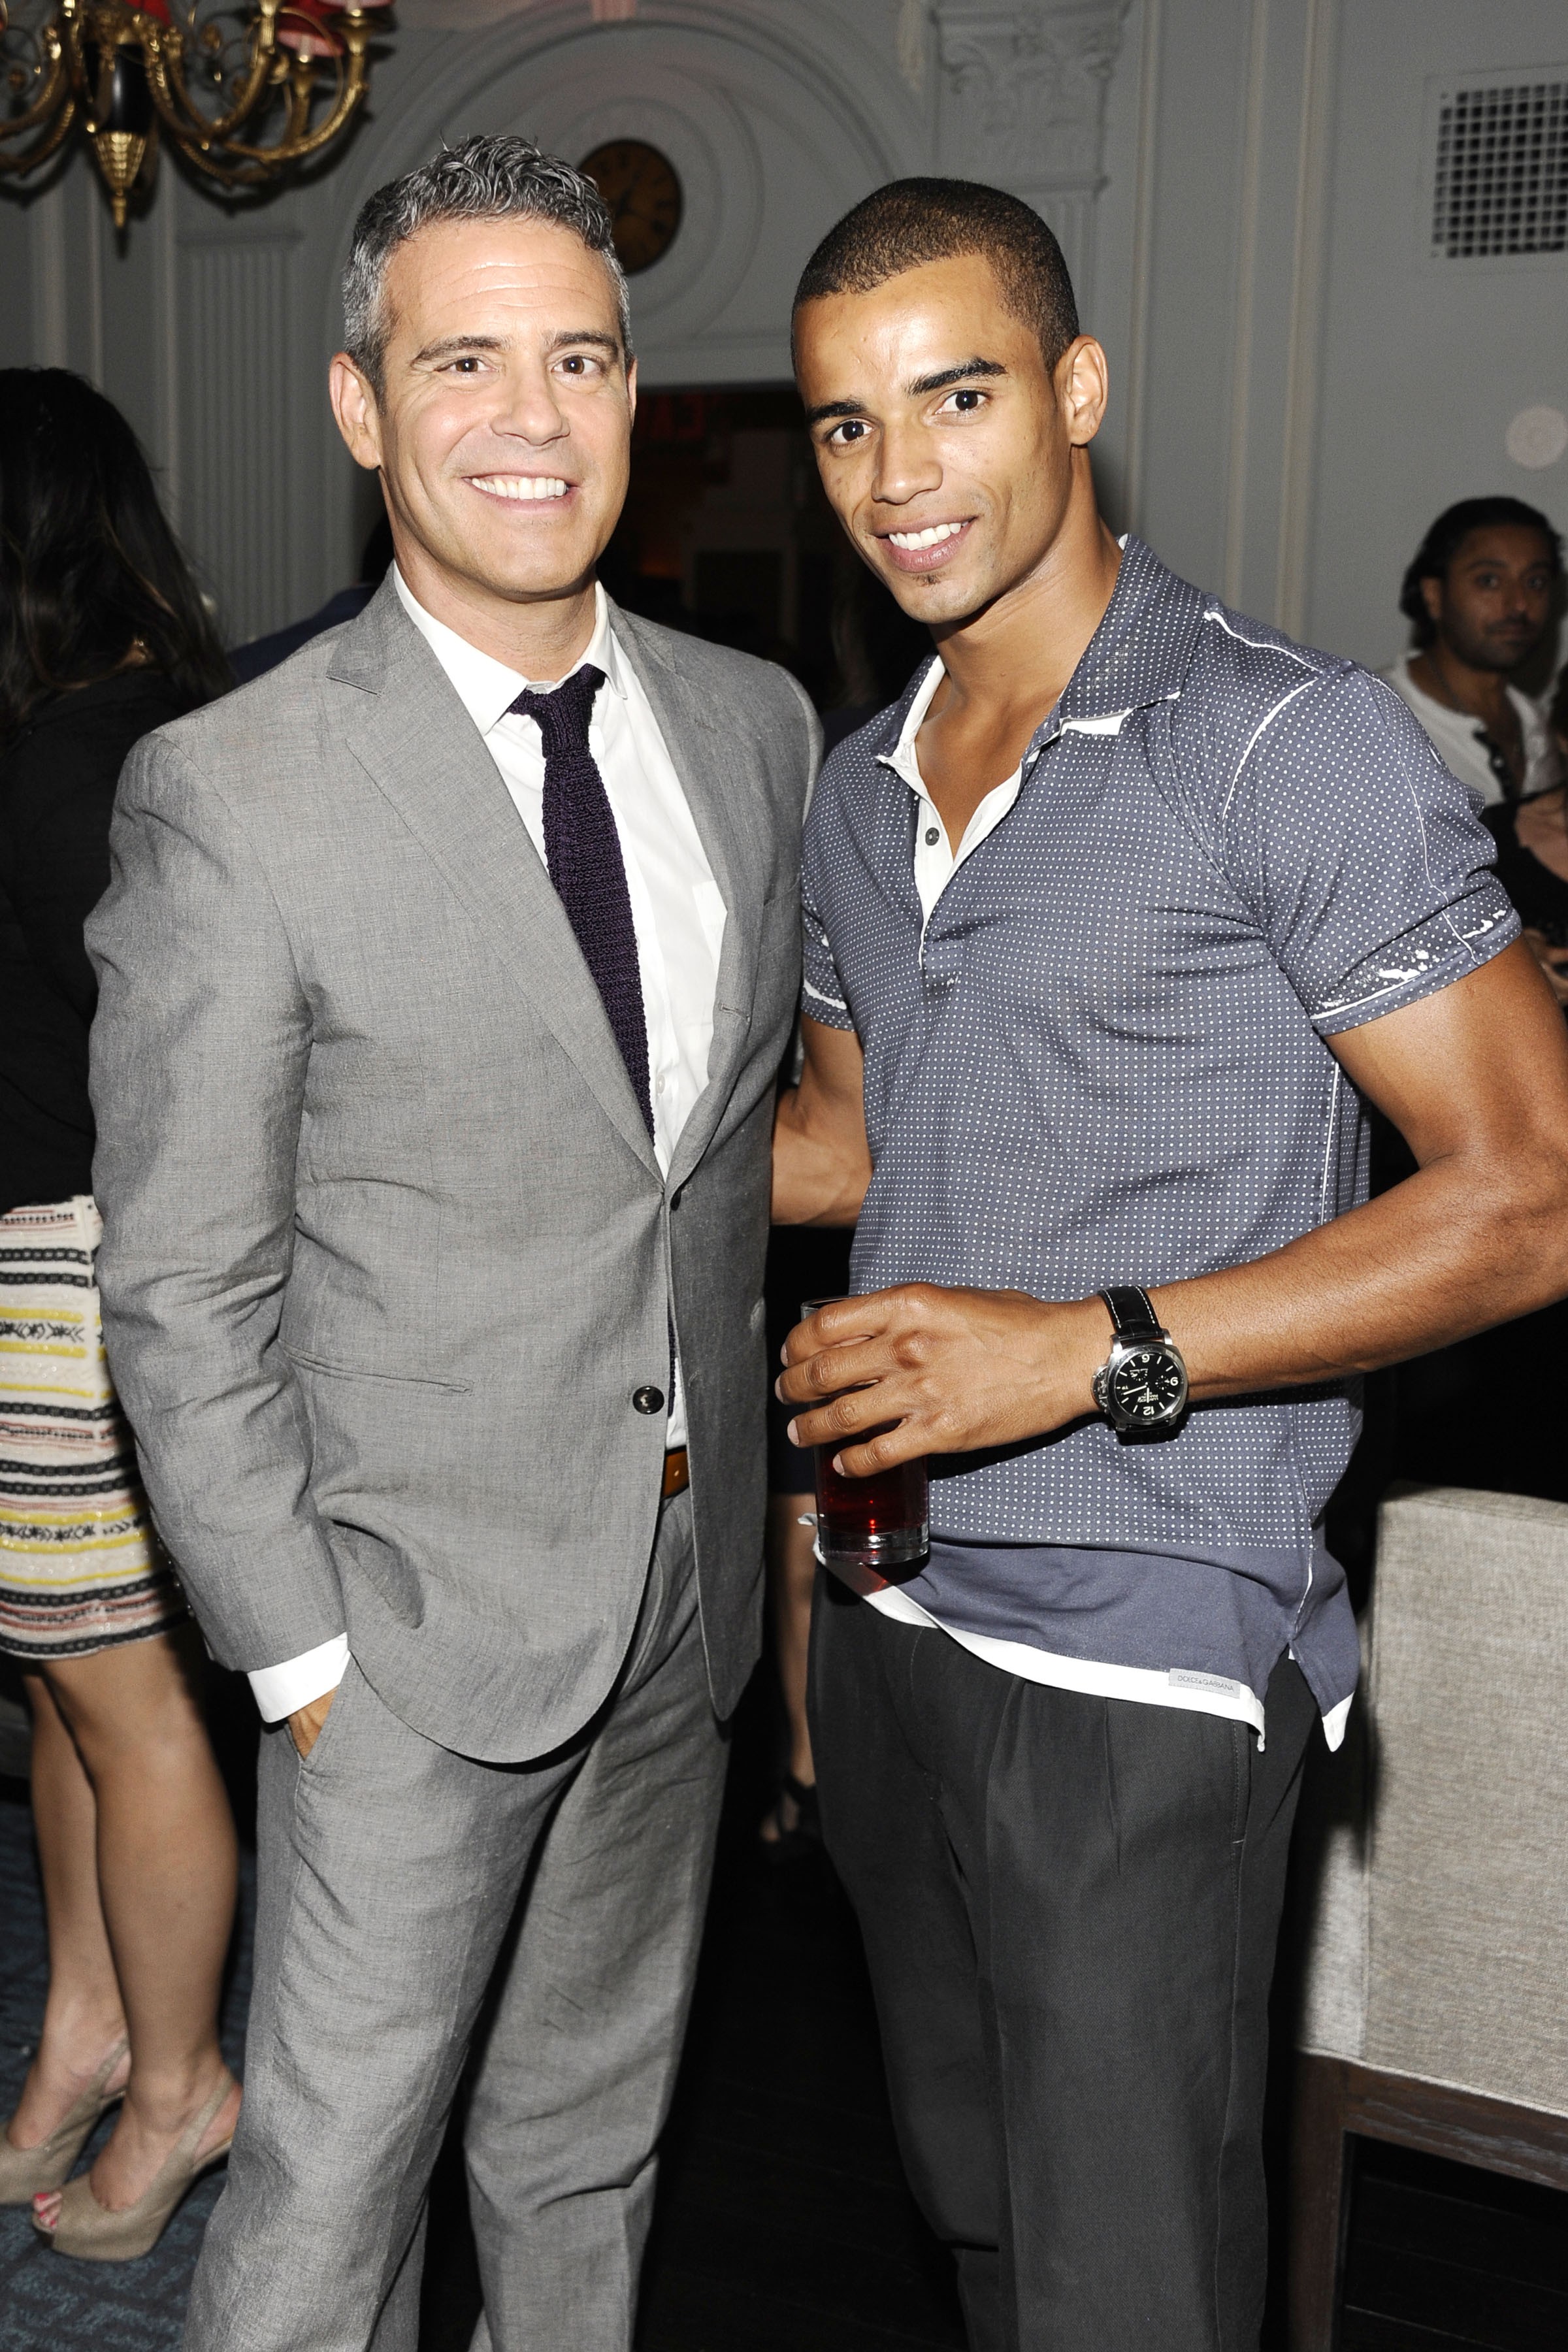 Andy Cohen & Brahim Zaibat - DOLCE & GABBANA and THE CINEMA SOCIETY host the after party for the EPIX WORLD PREMIERE of MADONNA: THE MDNA TOUR - photo by Patrick McMullan